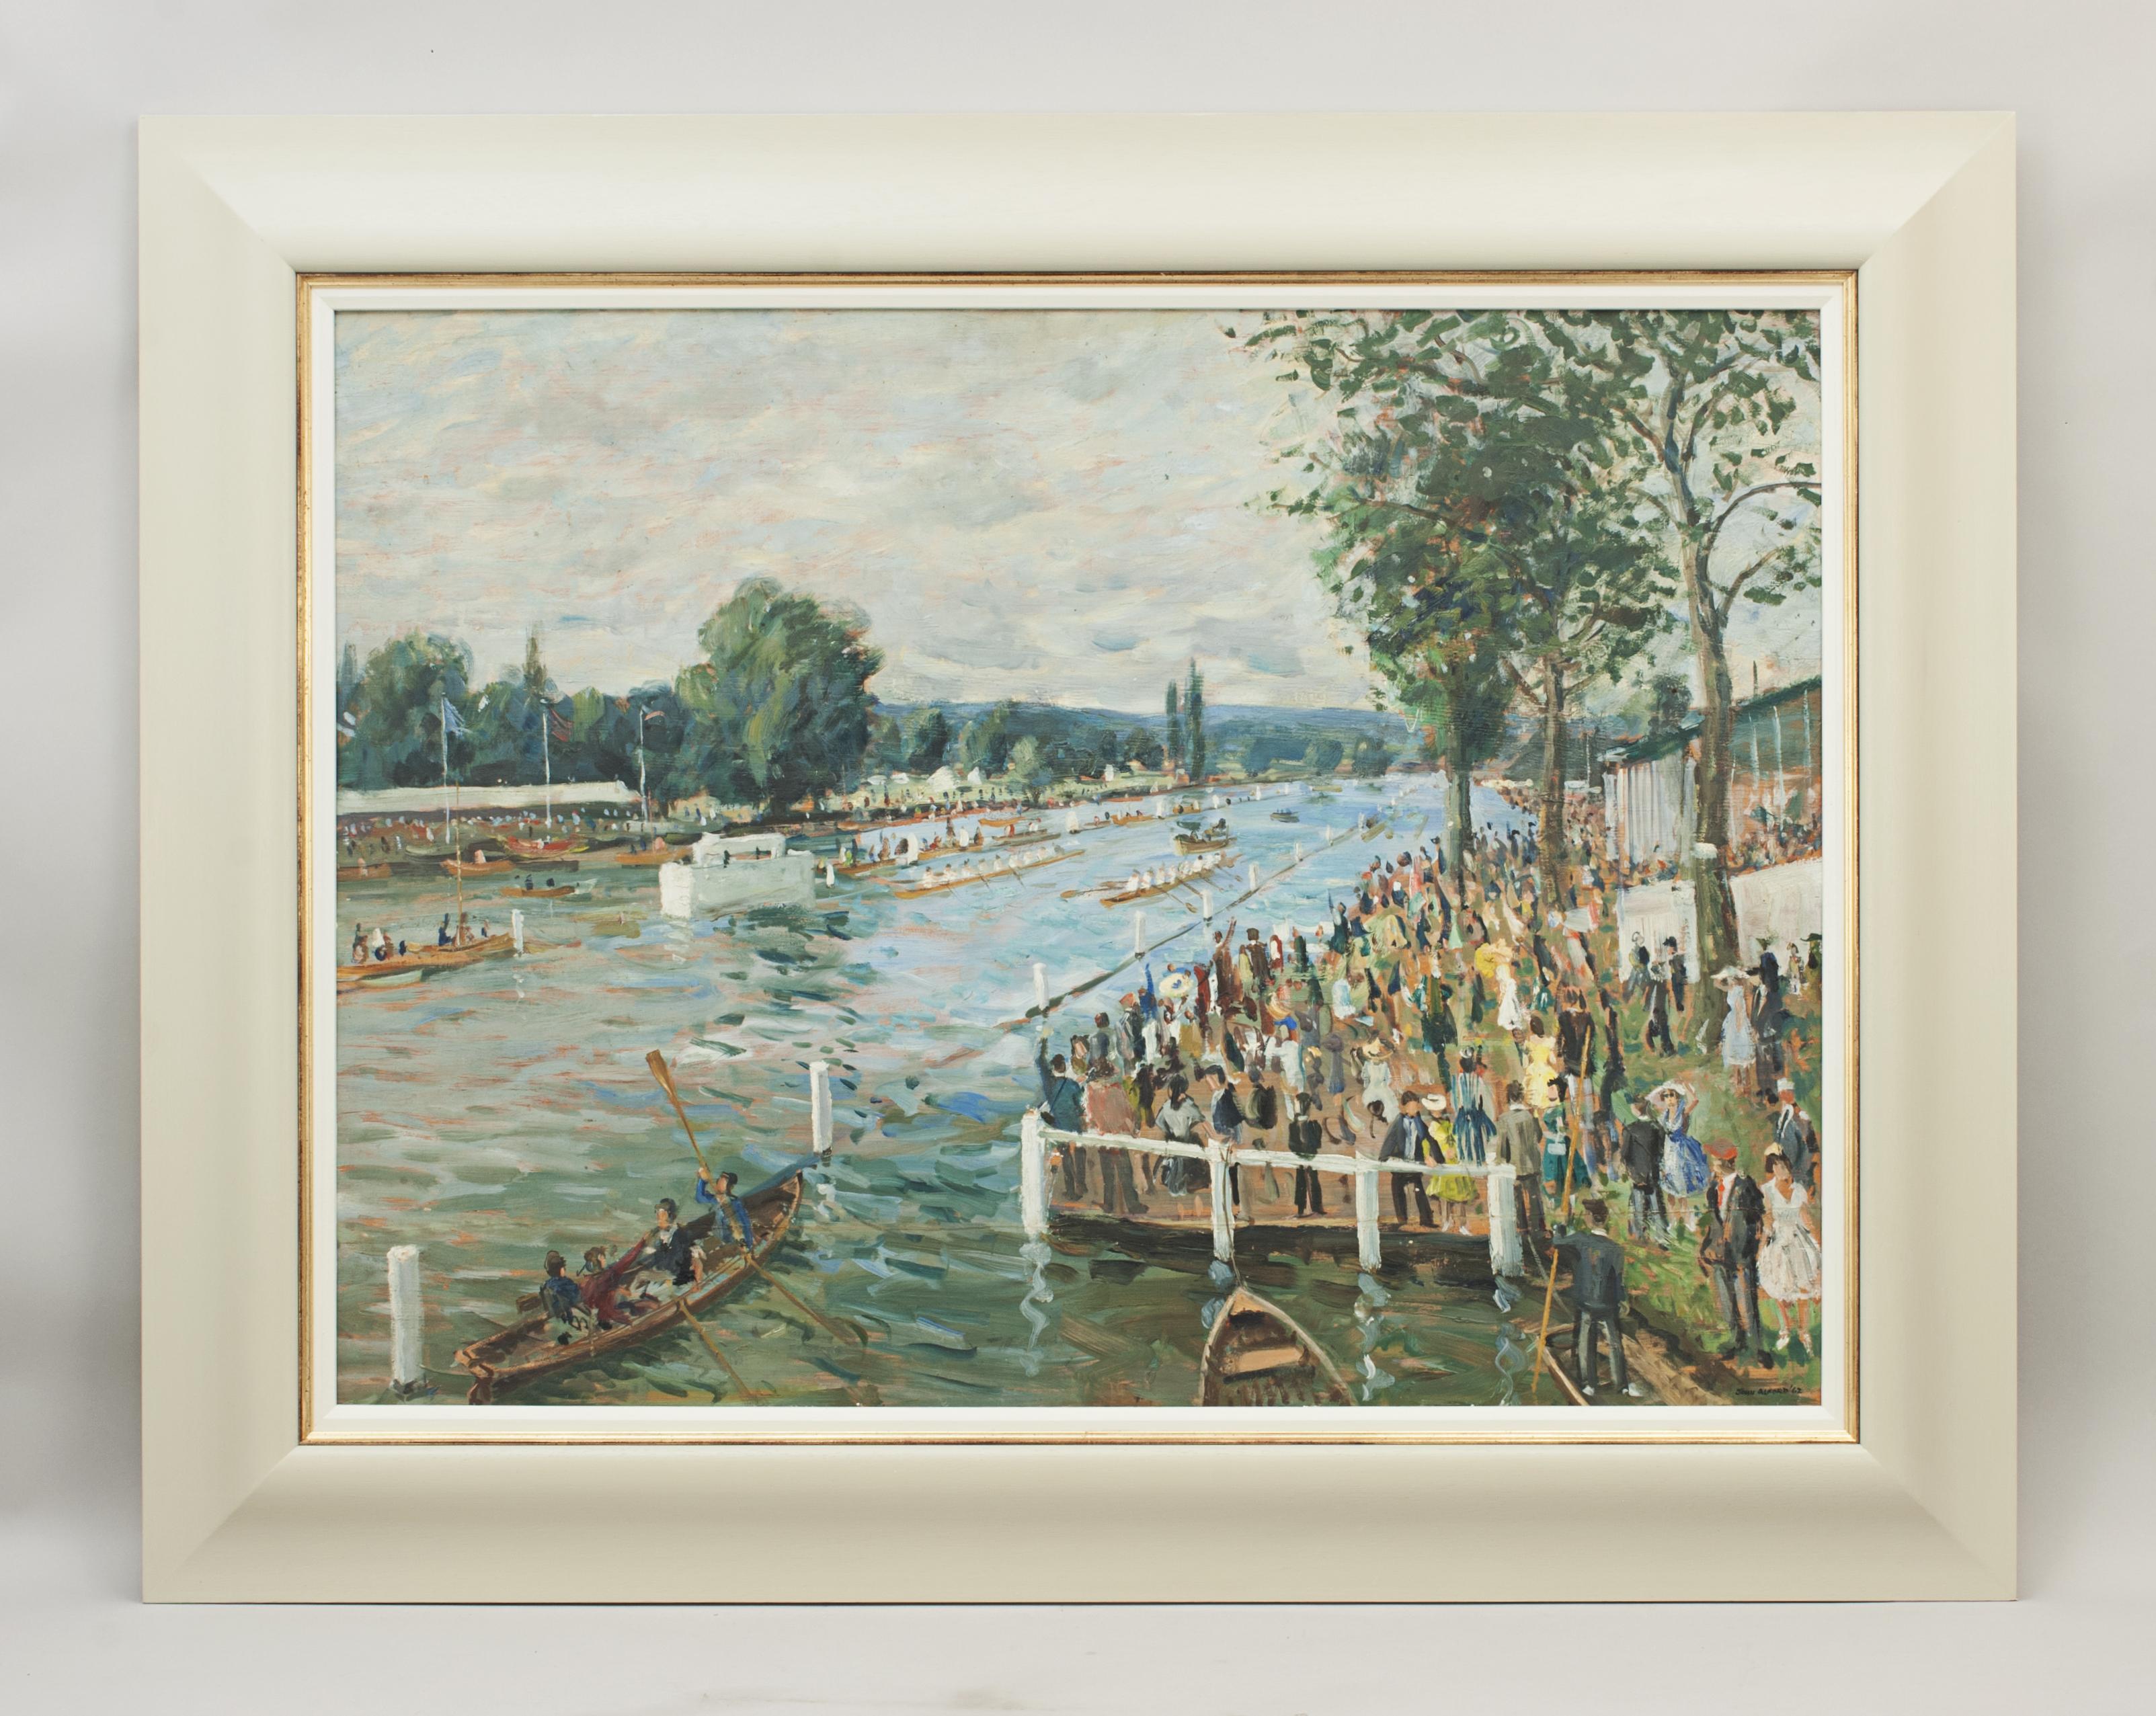 Oil on board painting of Henley Royal Regatta By John Alford.
A large colorful rowing picture of Henley Regatta by John Alford. This charming picture illustrates the romantic view of Henley in days gone by. The river bank is overcrowded with people